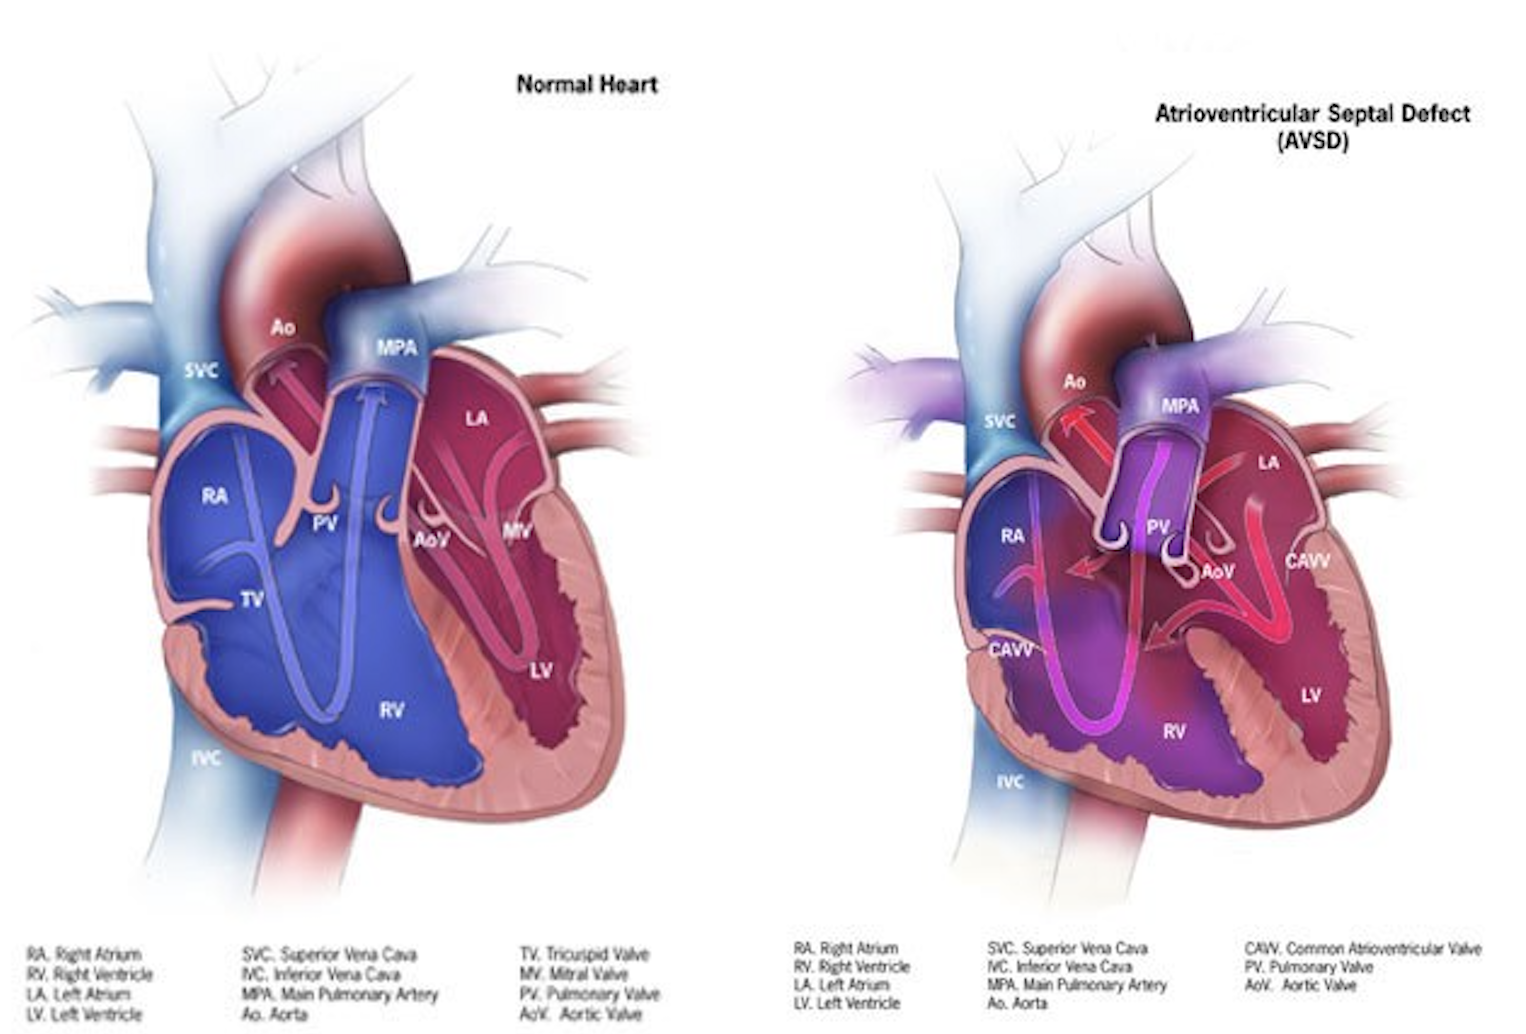 Diagram comparing a normal heart to a heart with atrioventricular septal defects.